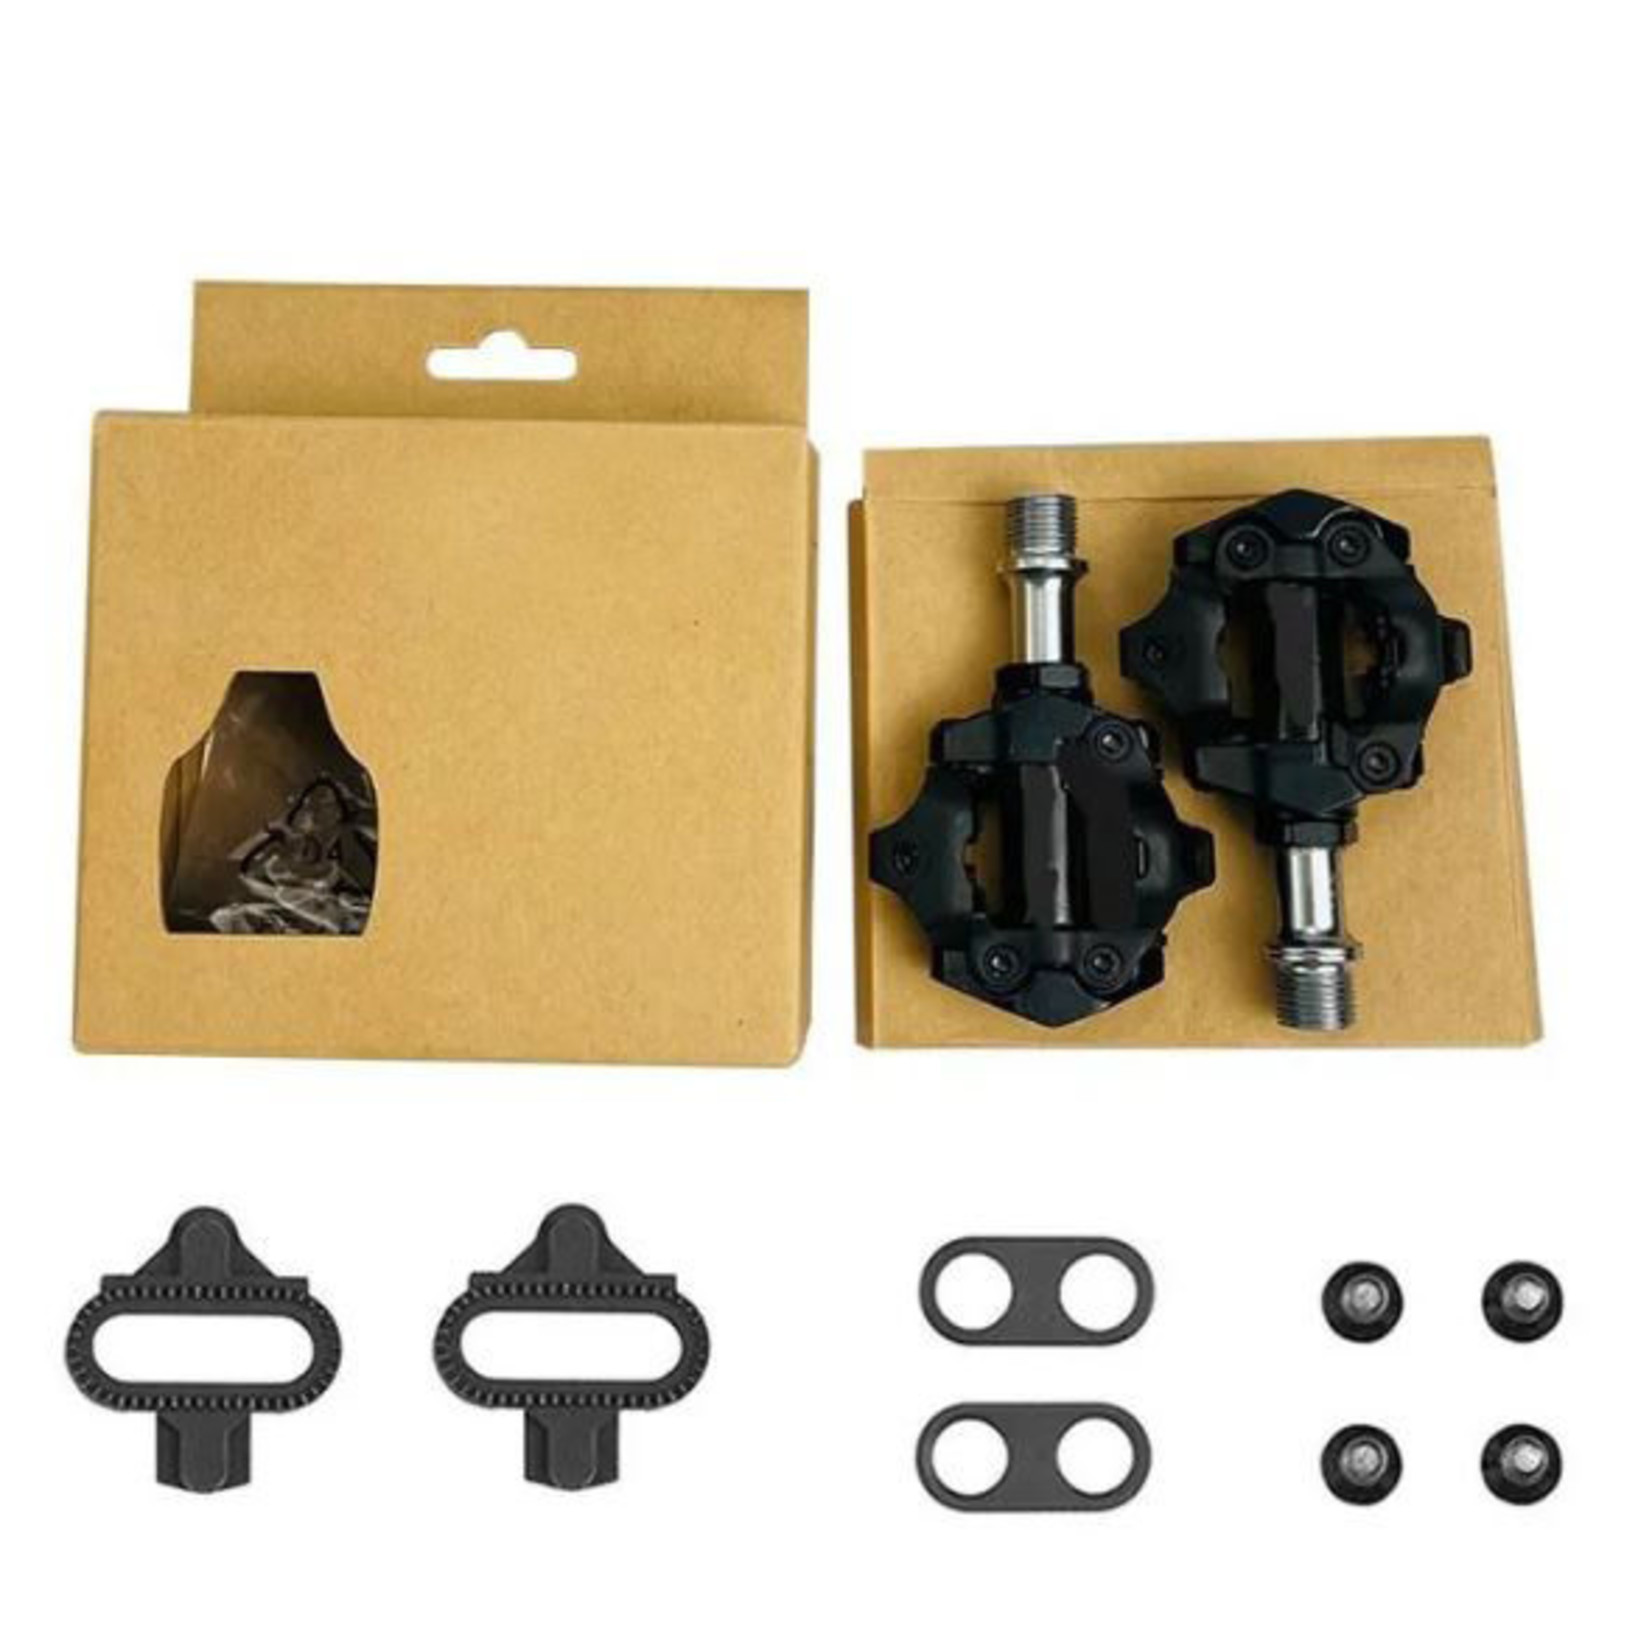 Bicycle Peddler Bare Pedals Clipless Bike Pedals